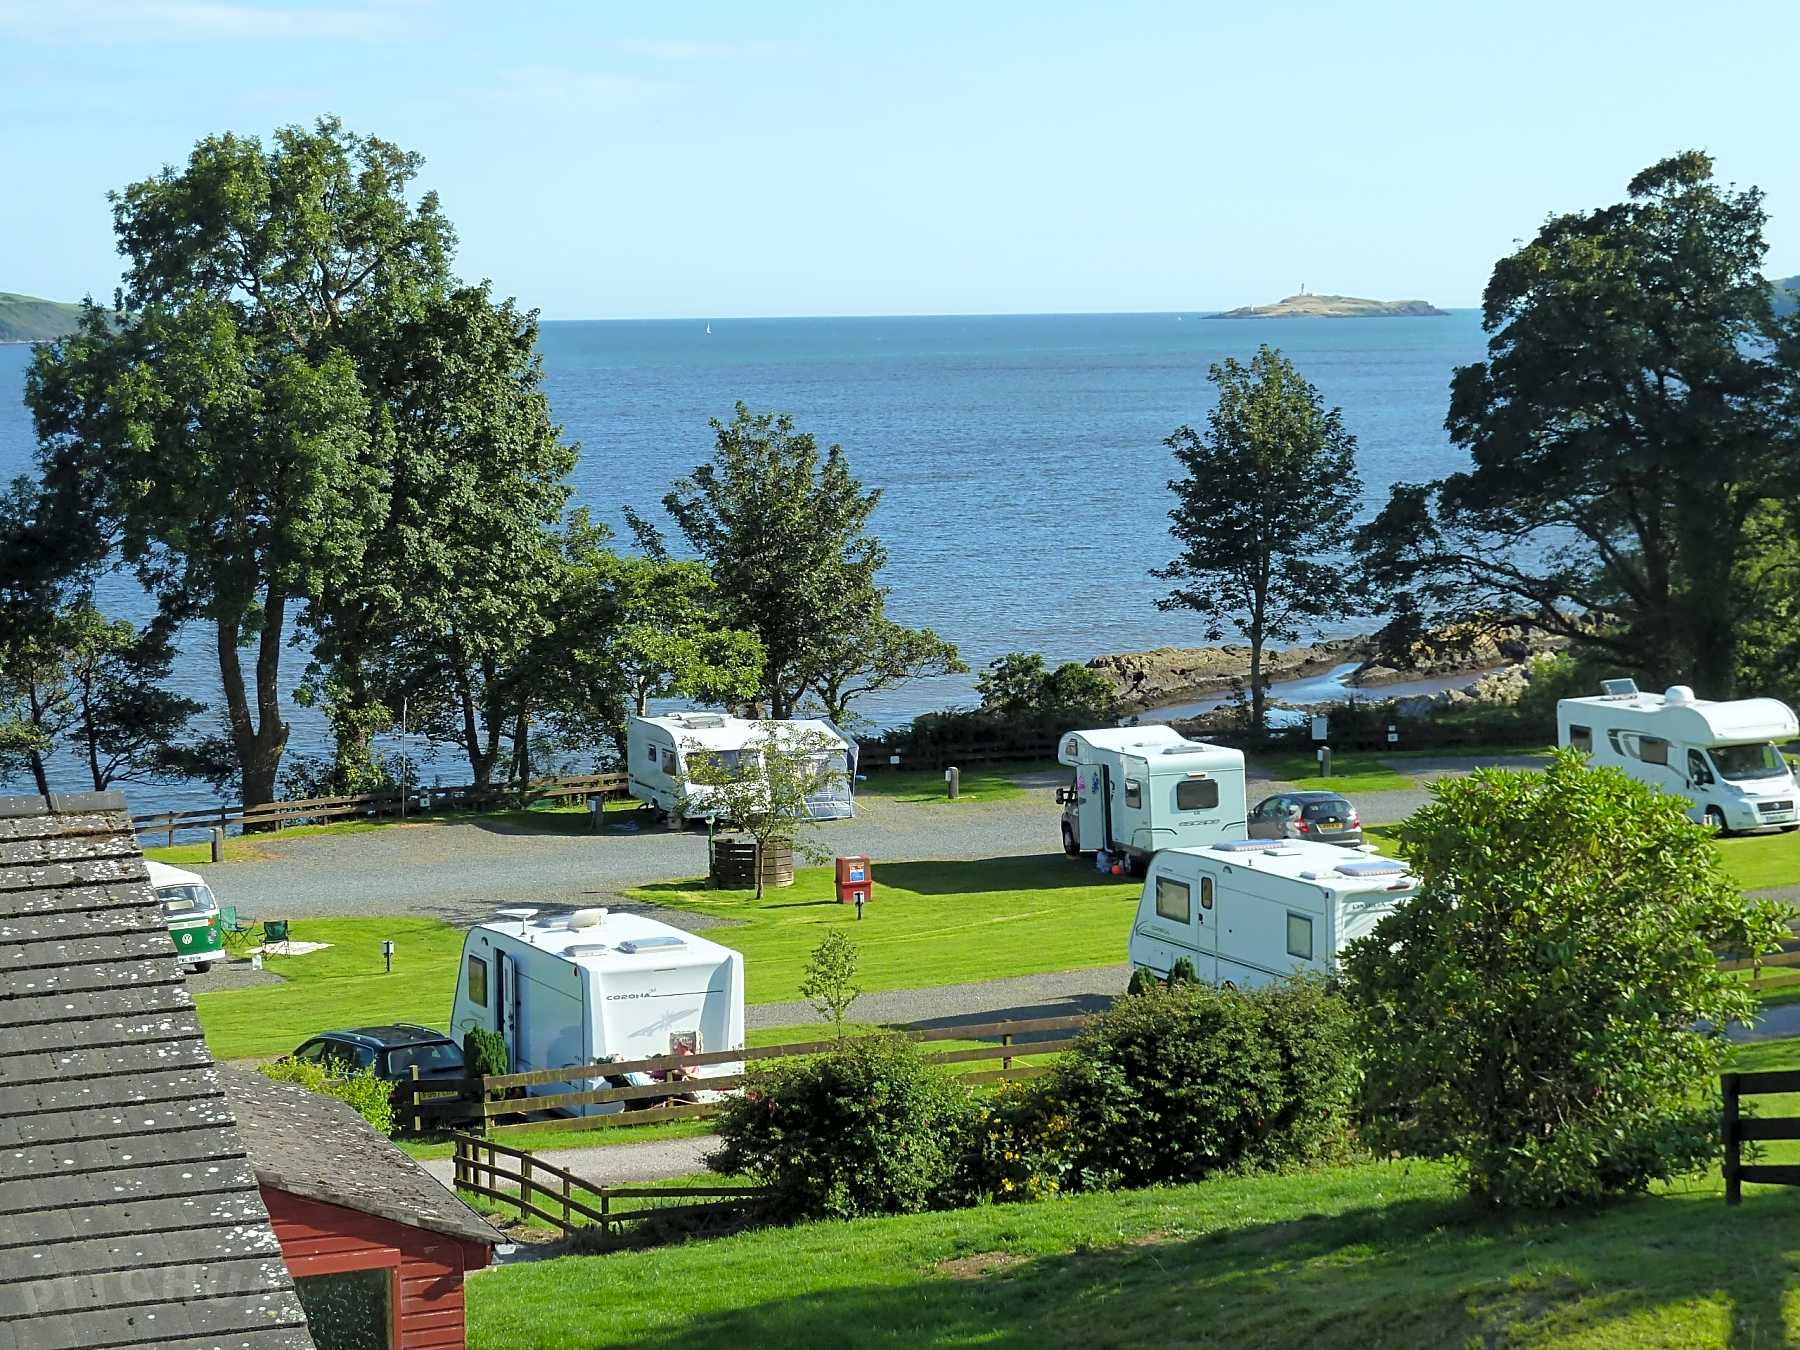 Car parking by pitch/unit | Motorhome Campsites - Kirkcudbright ...